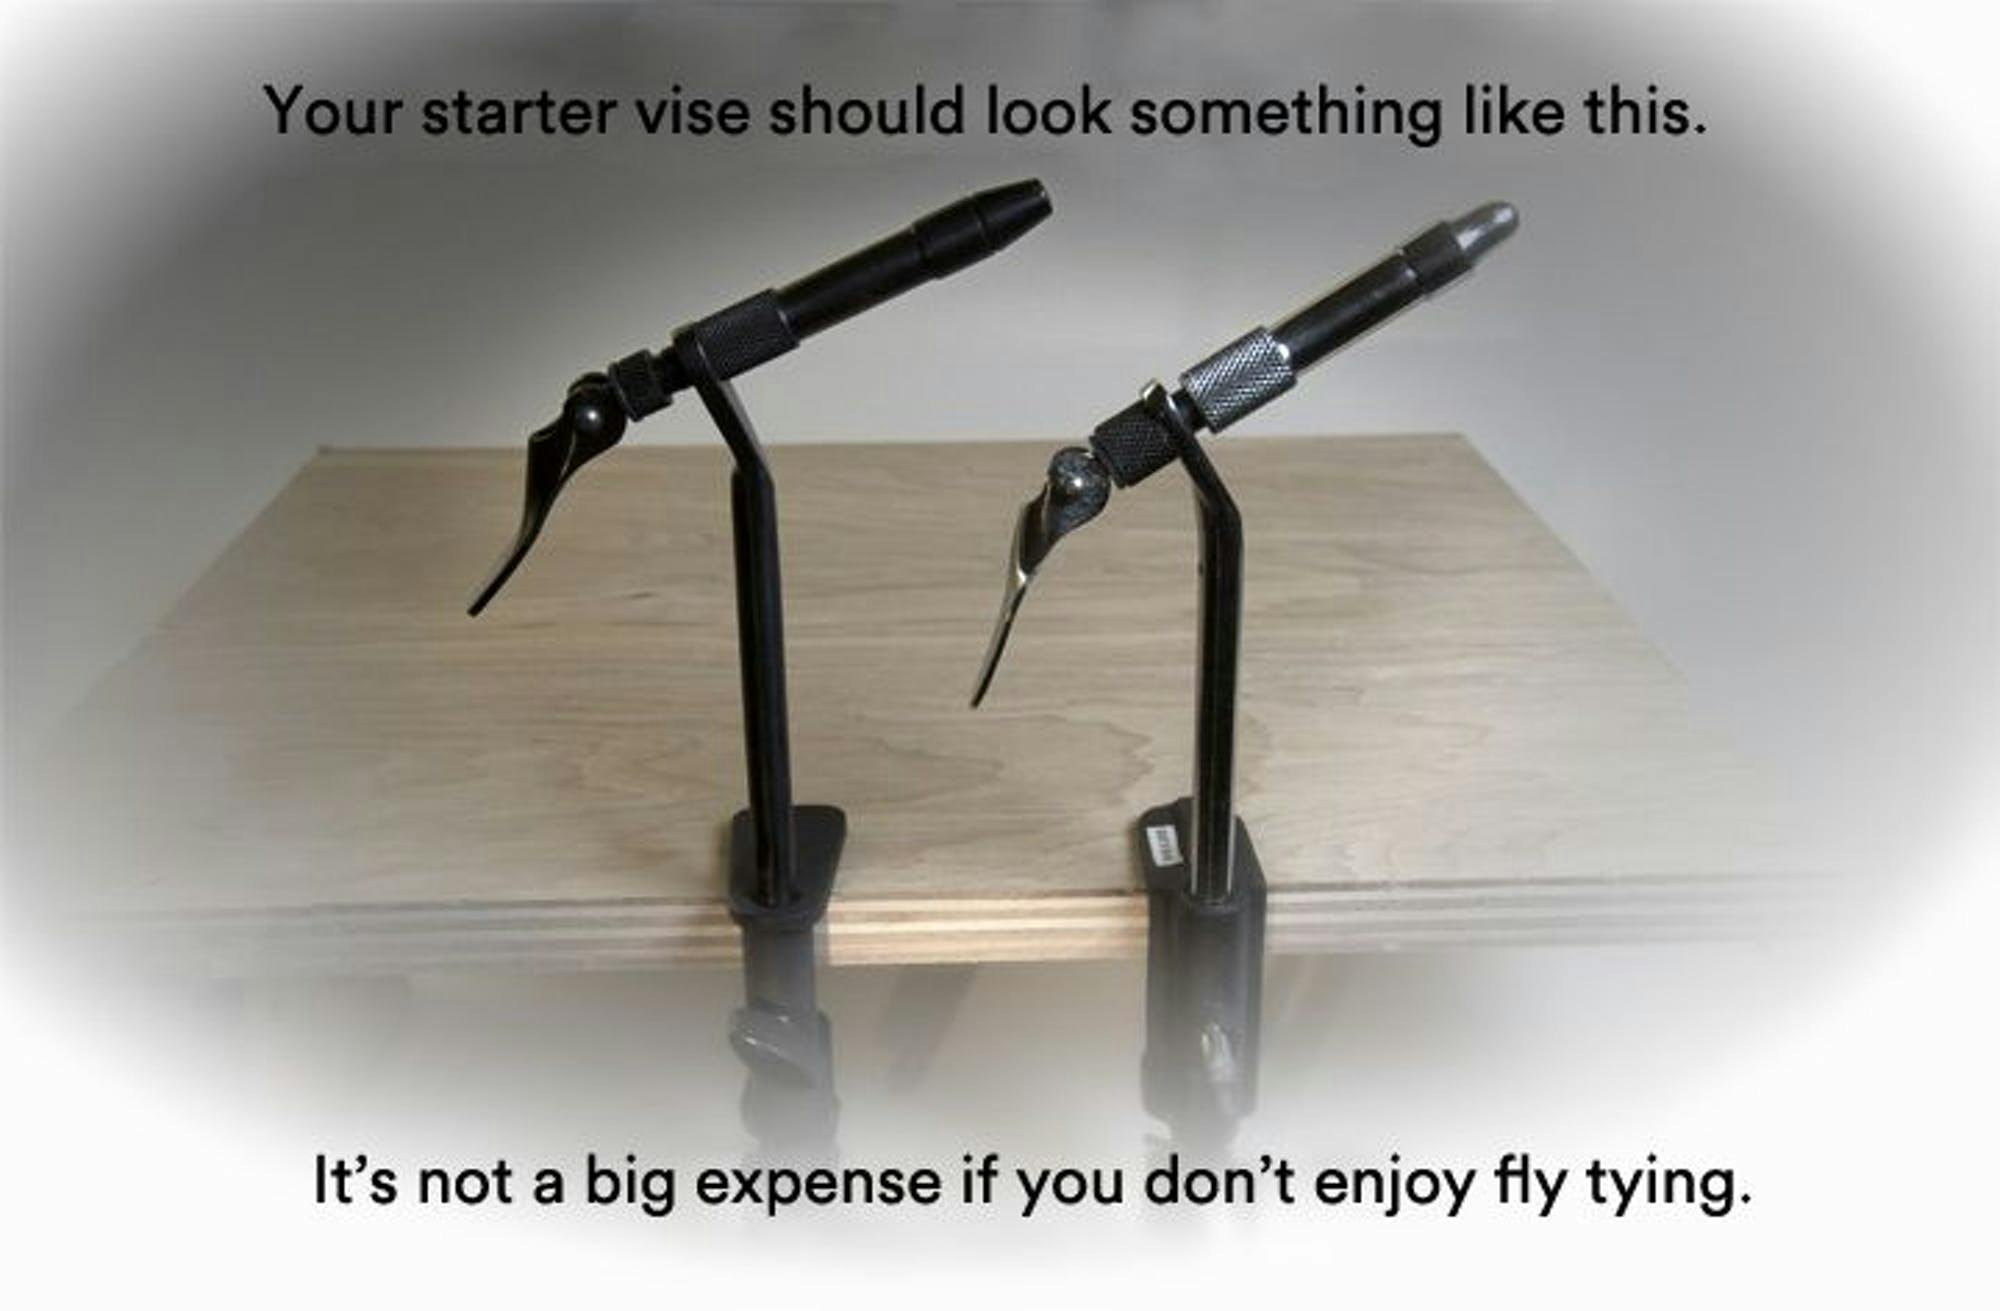 An image of two simple vises clamped onto a piece of plywood. The text reads: "Your start vise should look something like this. It's not a big expense if you don't enjoy fly tying."